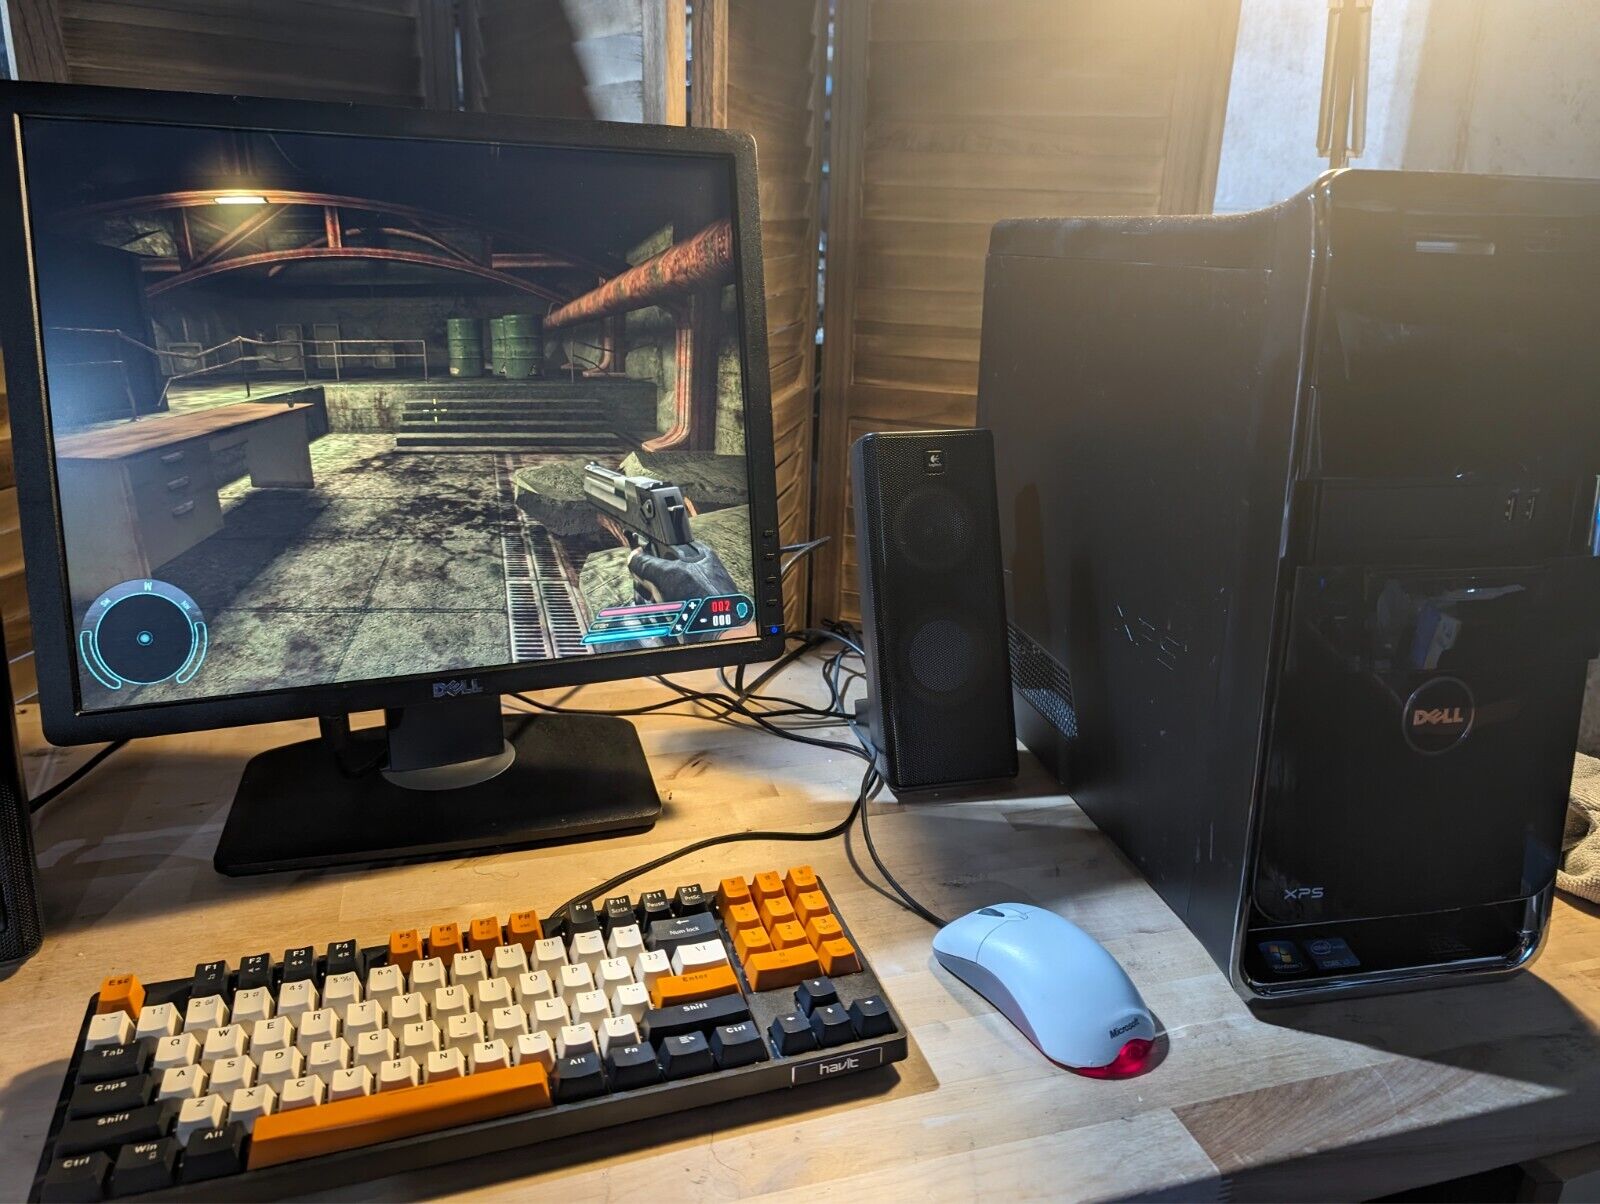 DELL Dimension XPS 8300: Overkill Windows XP Gaming PC